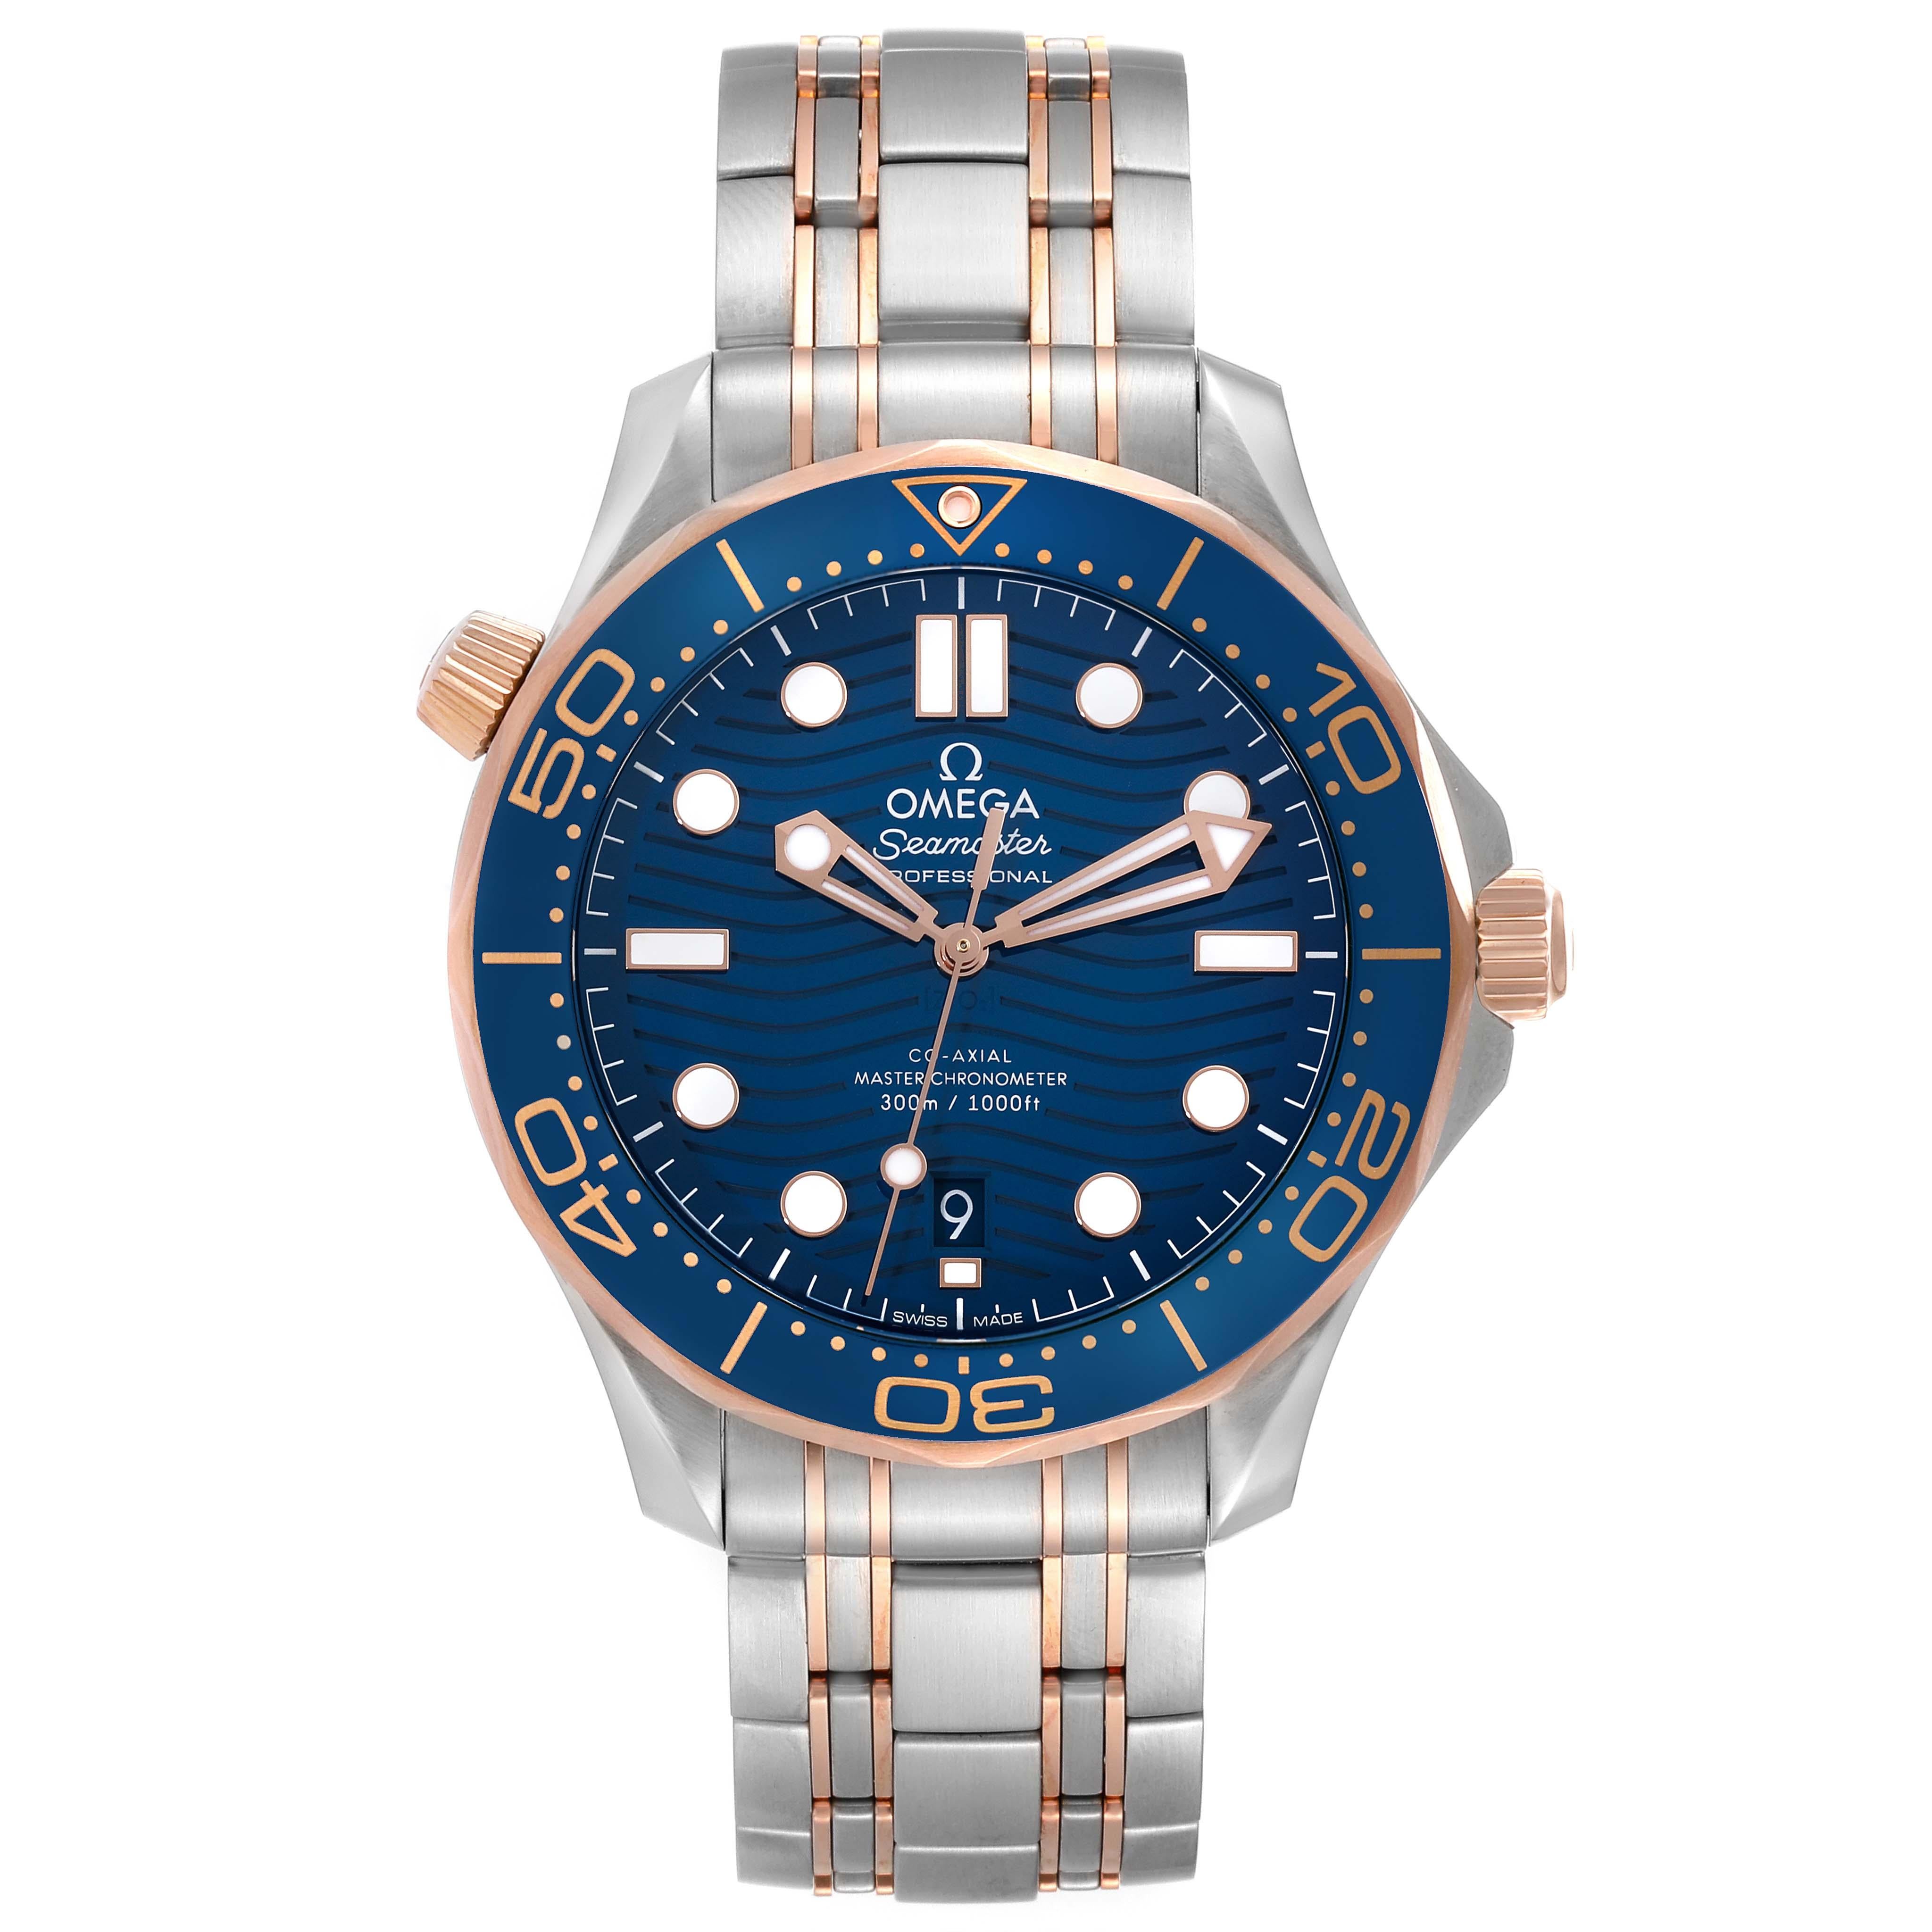 Omega Seamaster Diver Steel Rose Gold Mens Watch 210.20.42.20.03.002 Box Card. Automatic Self-winding chronograph movement with column wheel and Co-Axial escapement. Certified Master Chronometer, approved by METAS, resistant to magnetic fields